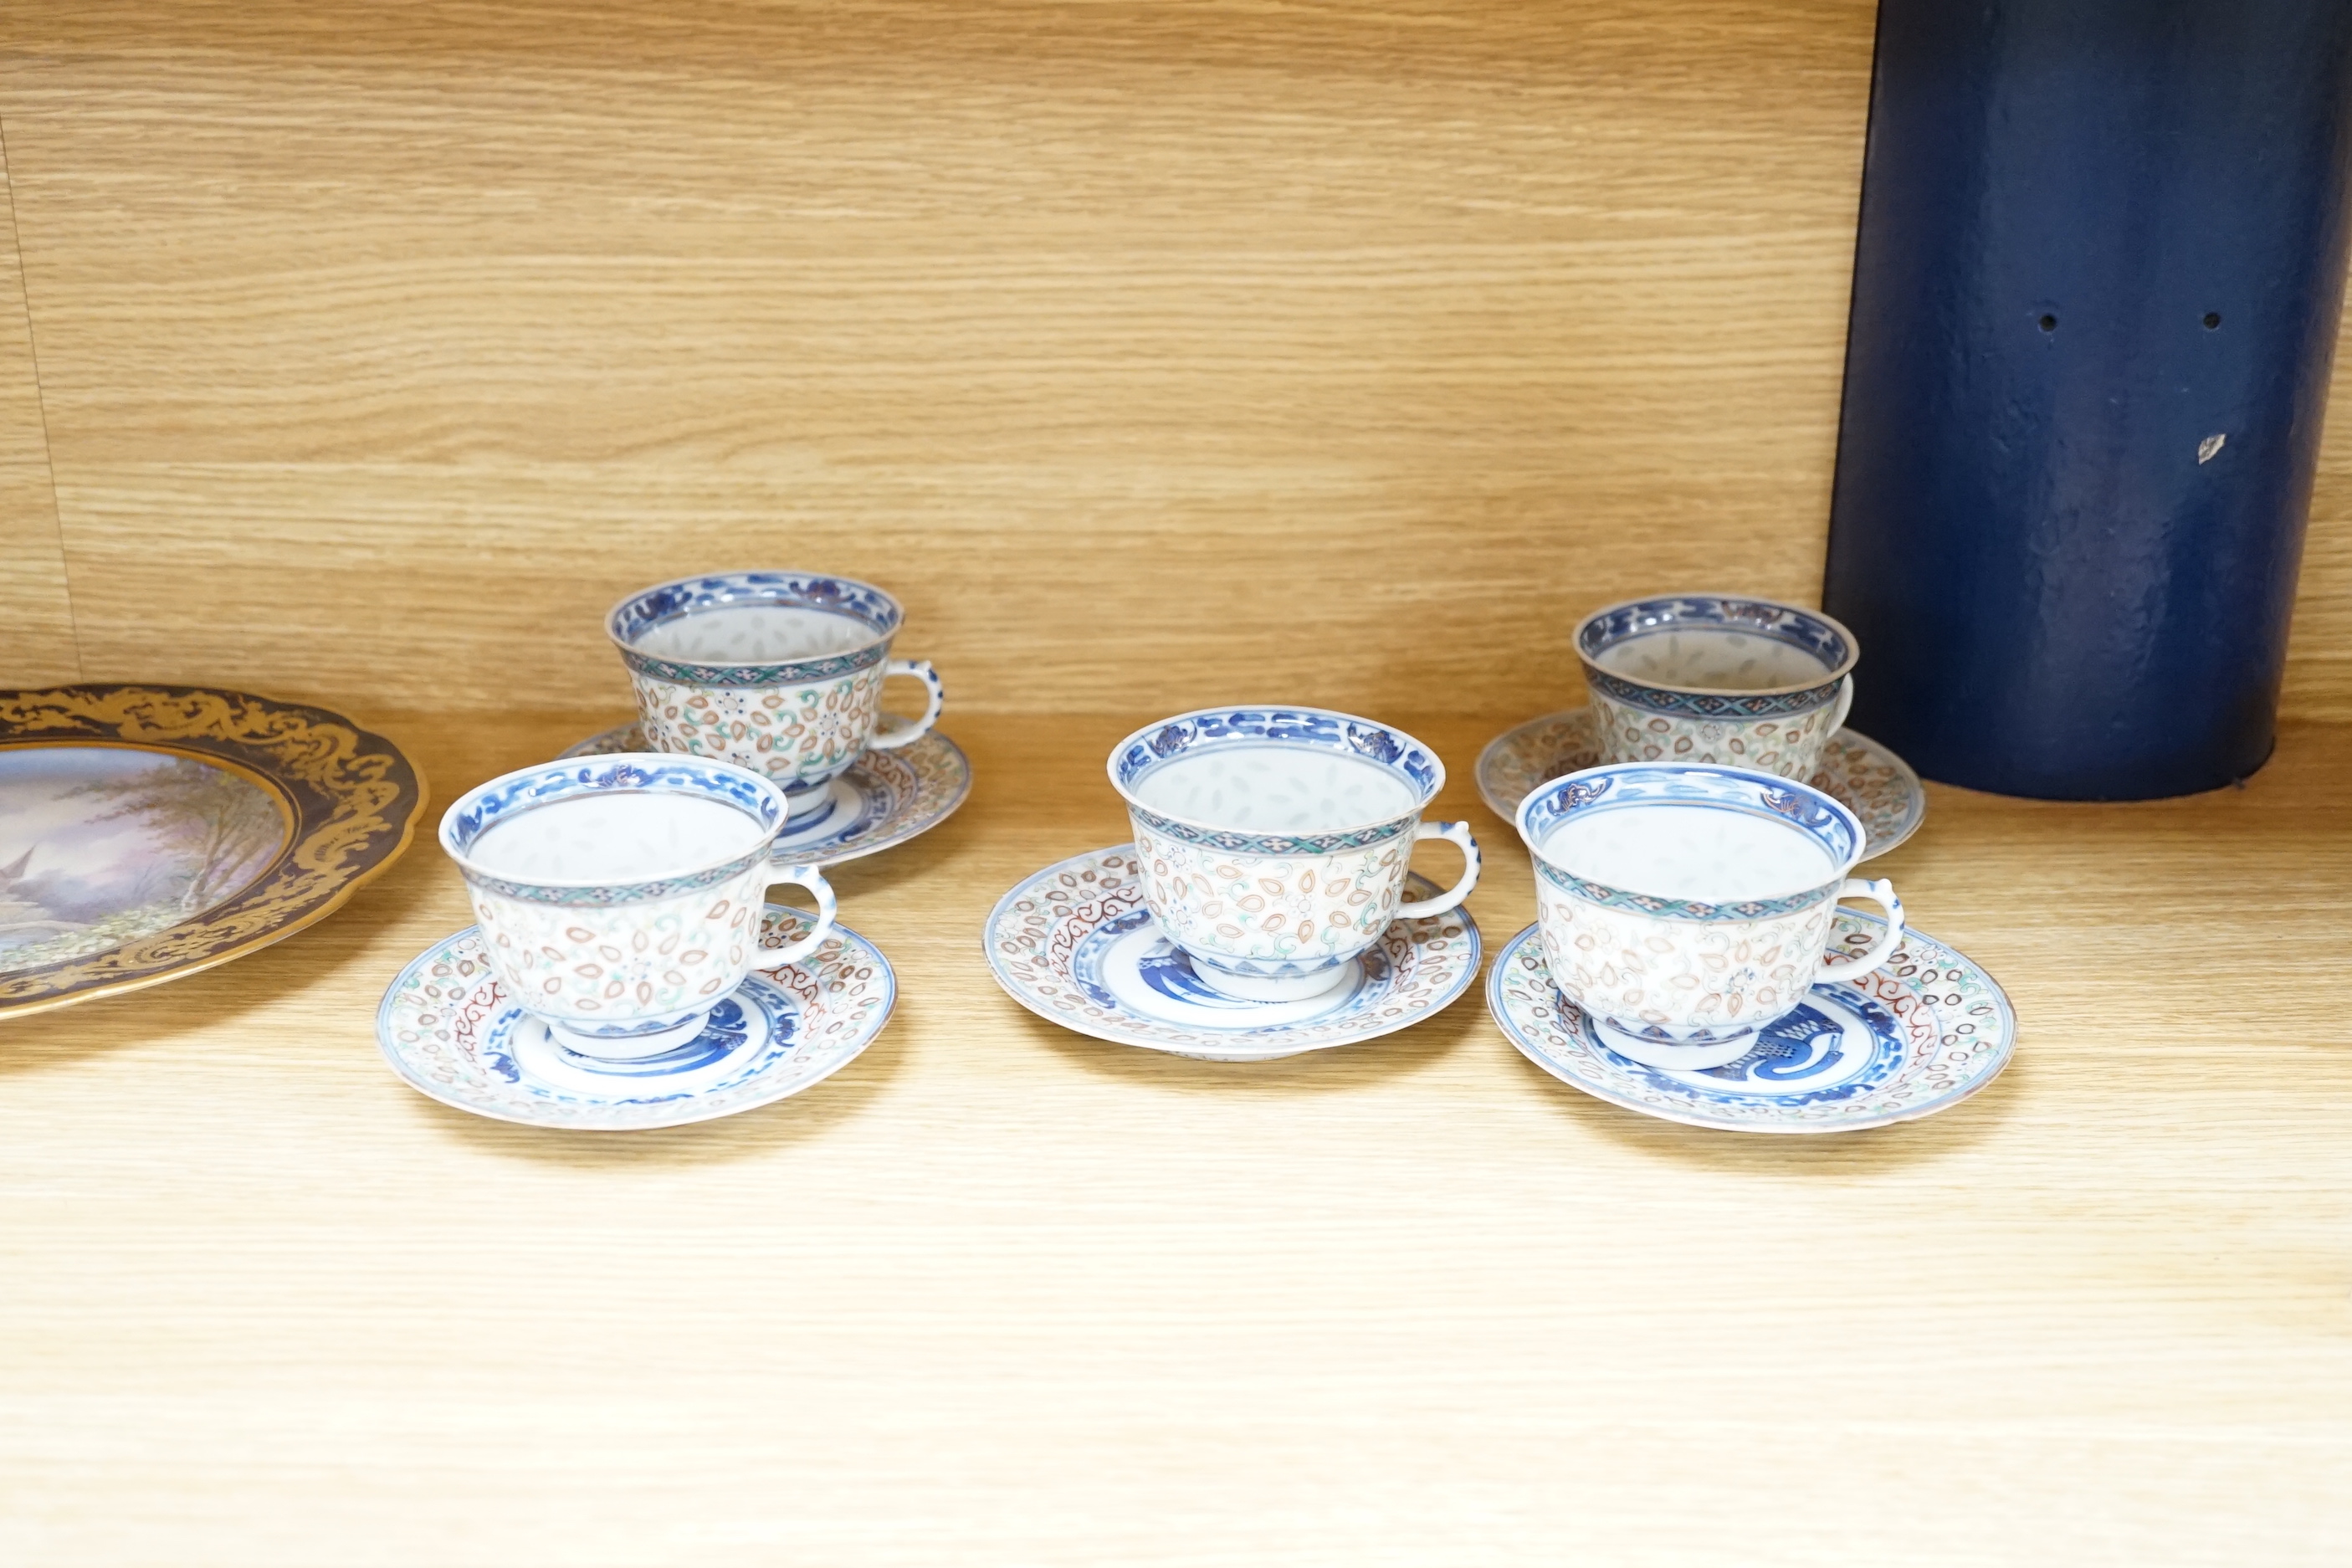 An early 20th century Chinese tea set